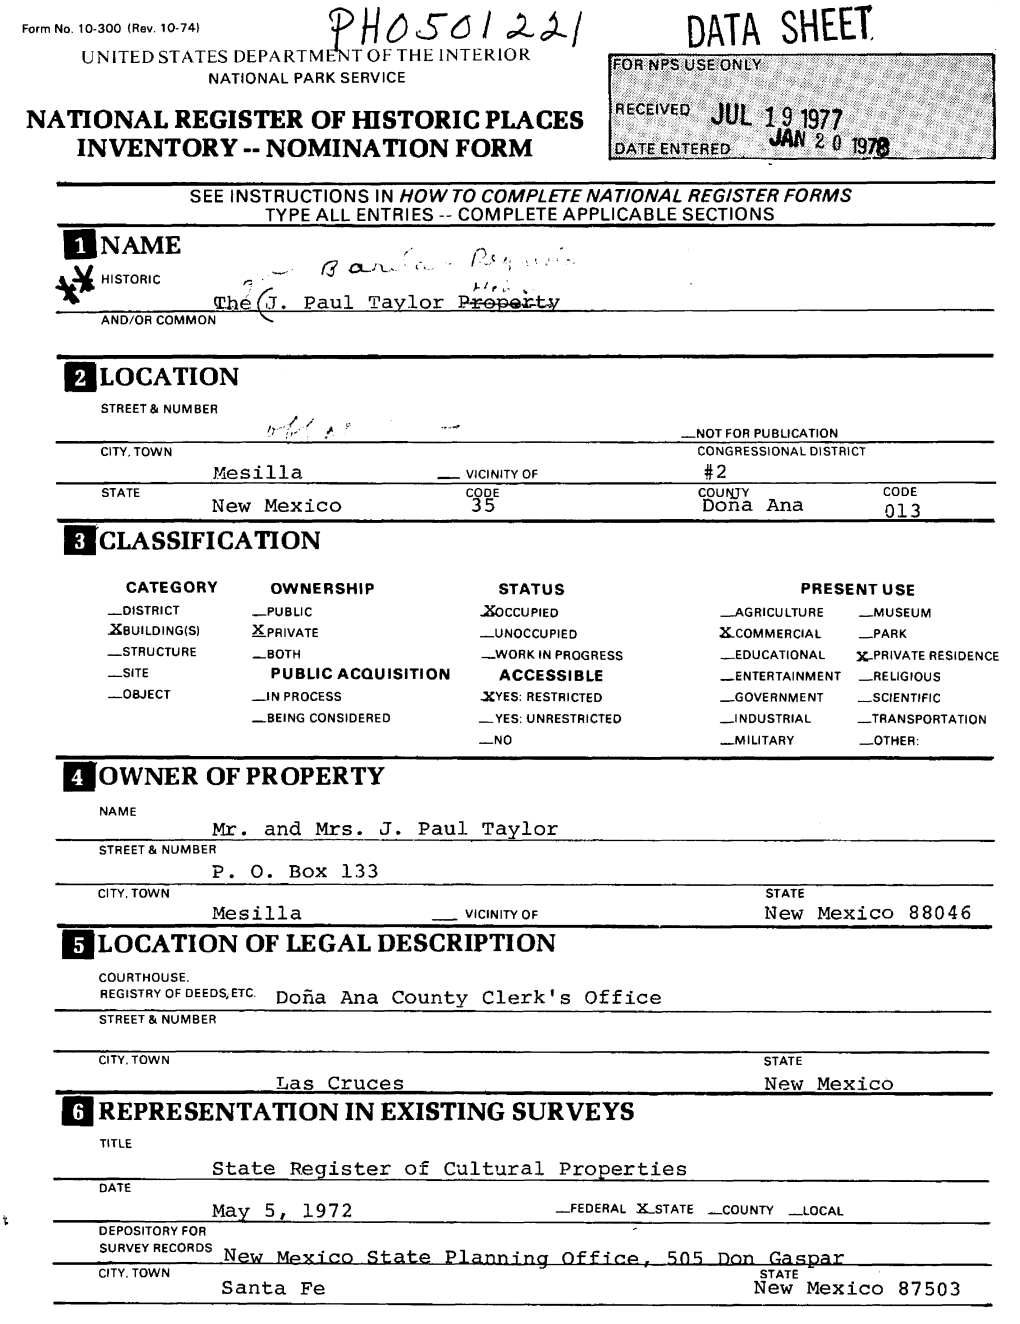 DATA SHEET, UNITED STATES DEPARTMENTEN of the INTERIOR NATIONAL PARK SERVICE NATIONAL REGISTER of HISTORIC PLACES INVENTORY -- NOMINATION FORM Illilllllill